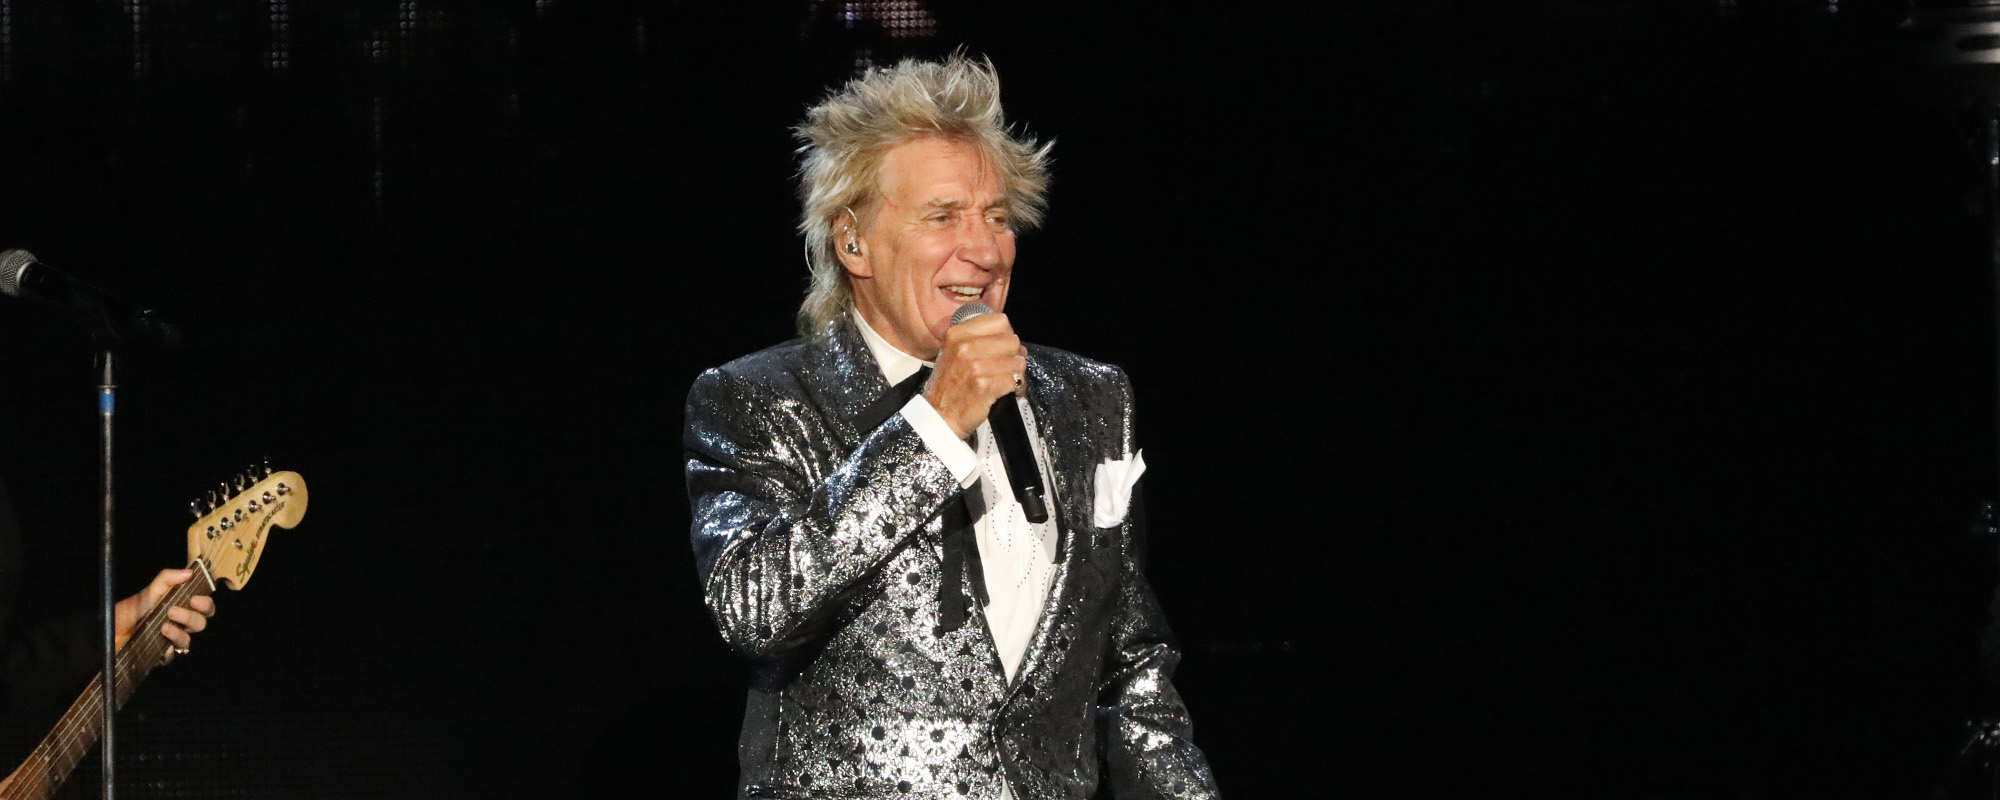 The Devirginized Meaning Behind Rod Stewart’s 1971 Hit “Maggie May”